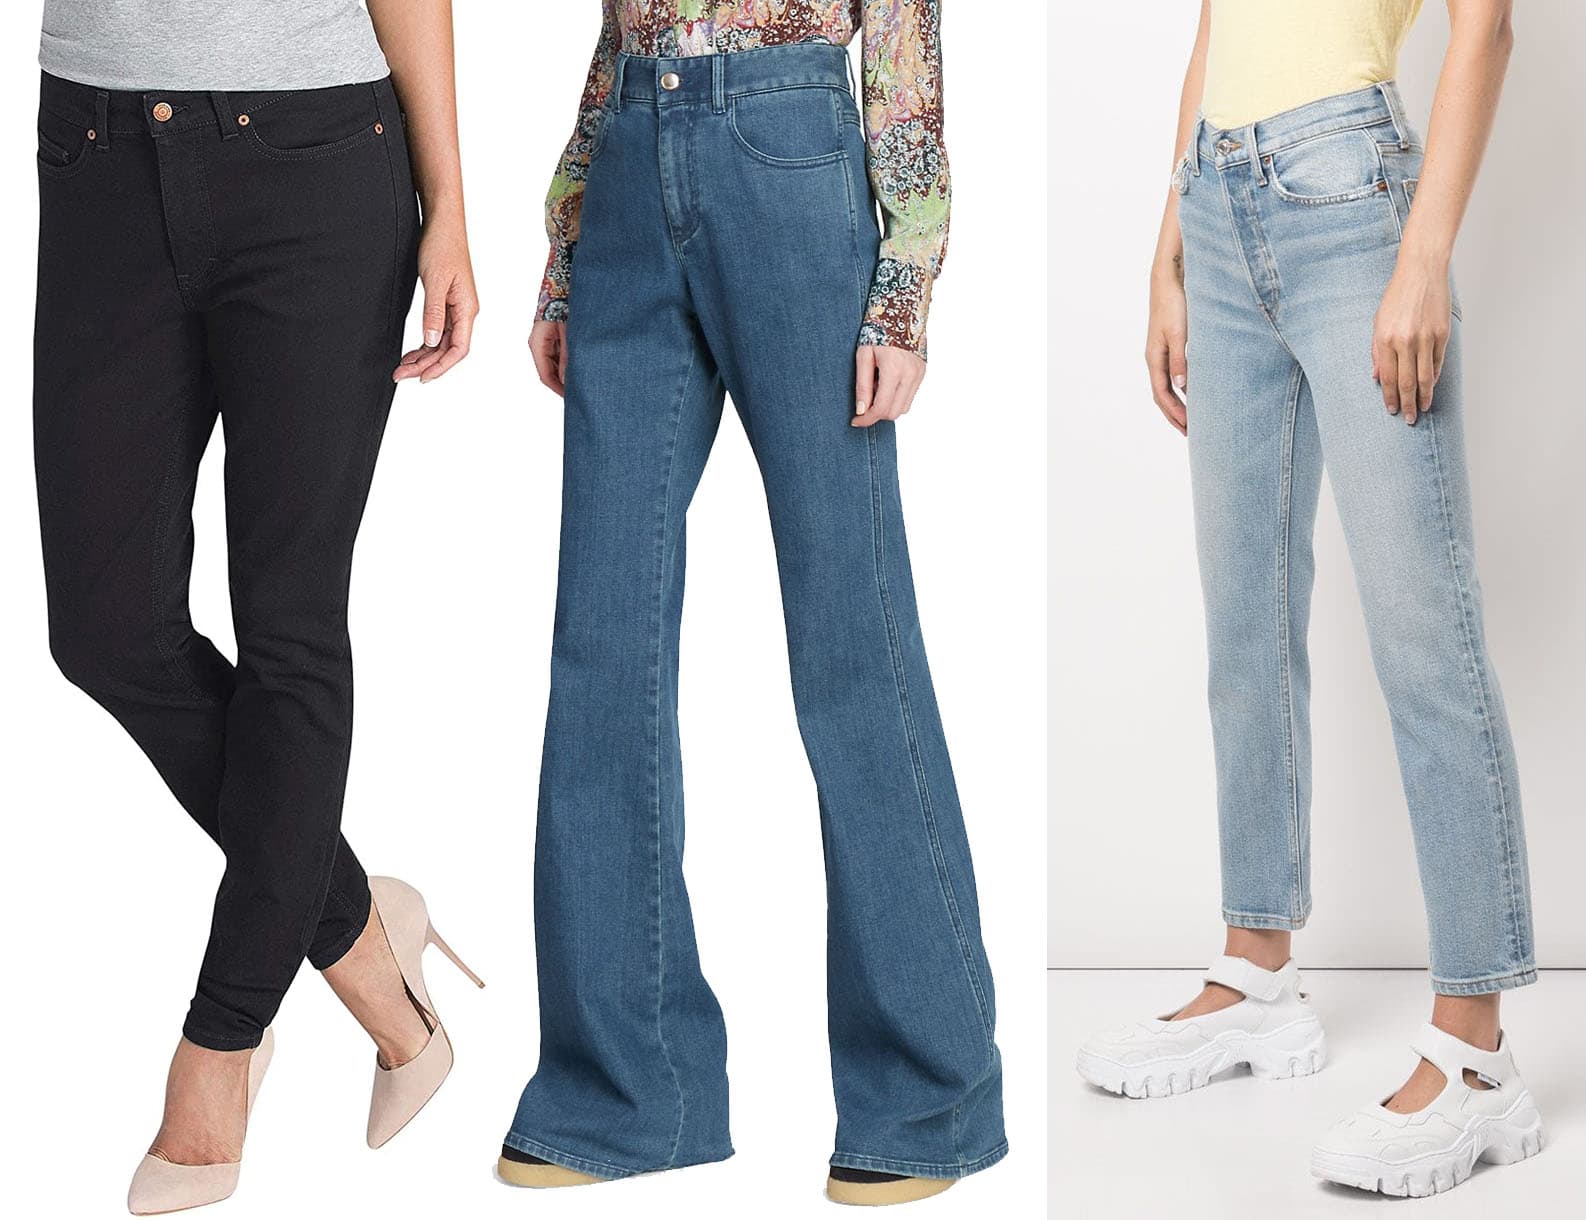 Dickies Perfect Shape denim jeans - skinny stretch, Chloe flared high-waisted stretch denim jeans, Re/Done Comfort Stretch cropped jeans